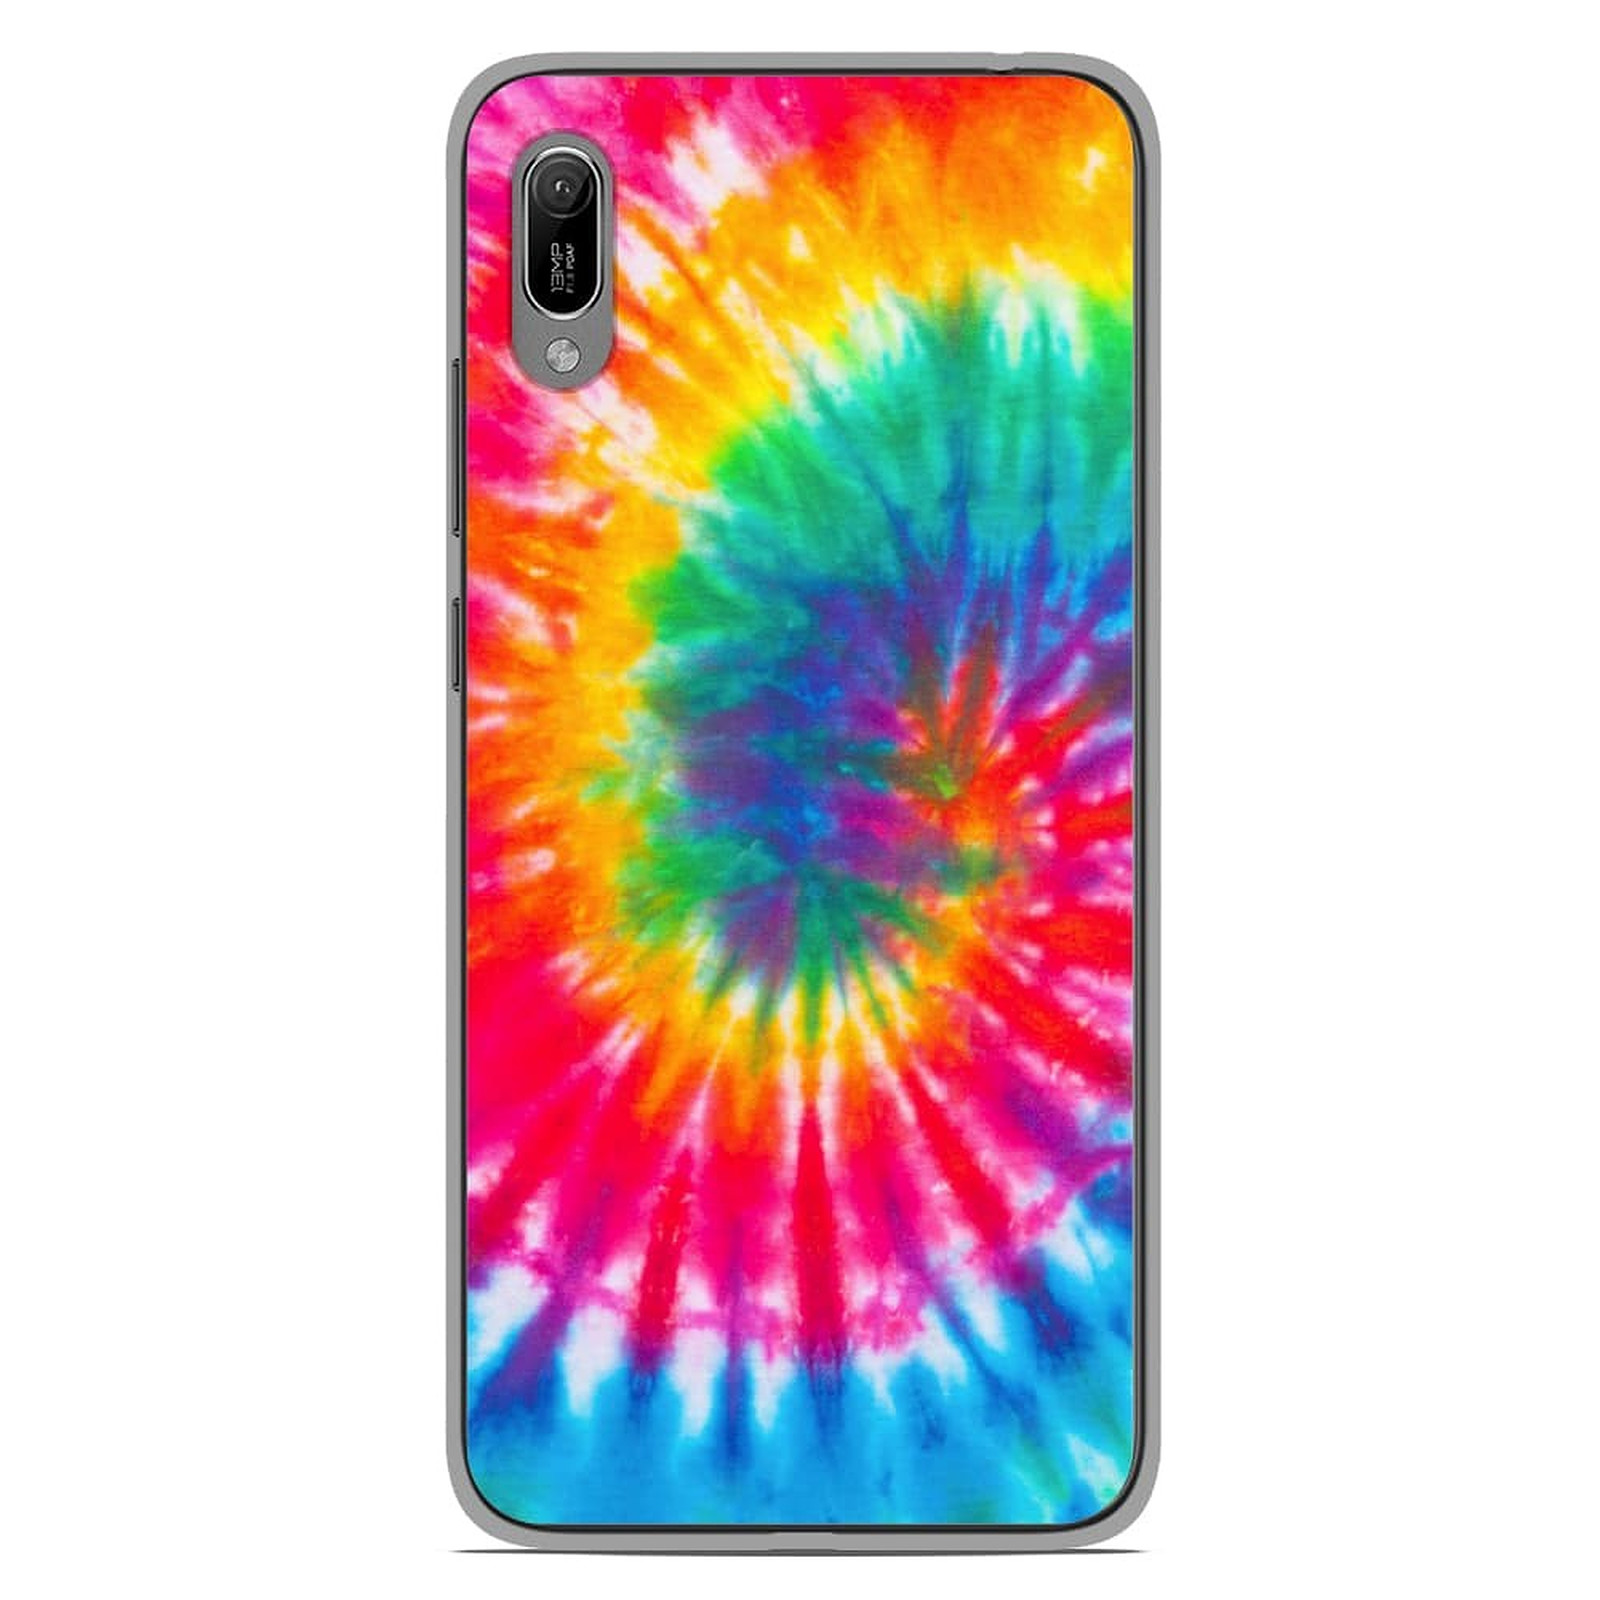 1001 Coques Coque silicone gel Huawei Y6 2019 motif Tie Dye Spirale - Coque telephone 1001Coques